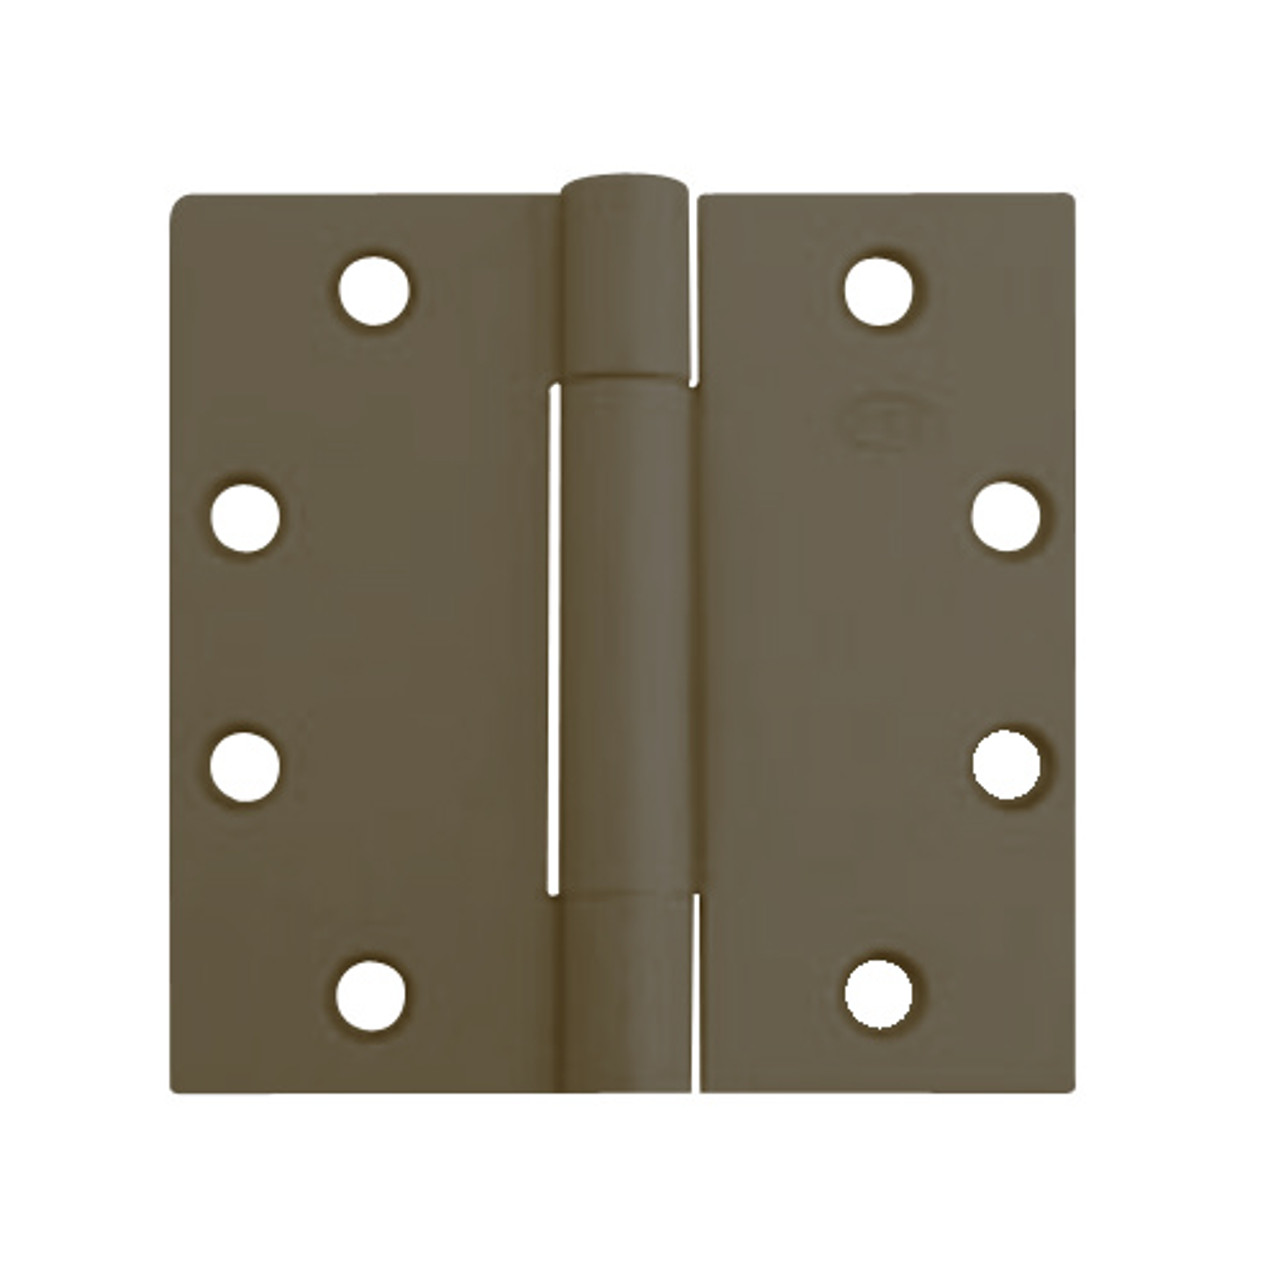 3CB1HW-4-5x4-640-TW4 IVES 3 Knuckle Concealed Bearing Full Mortise Hinge with Electric Thru-Wire in Dark Bronze